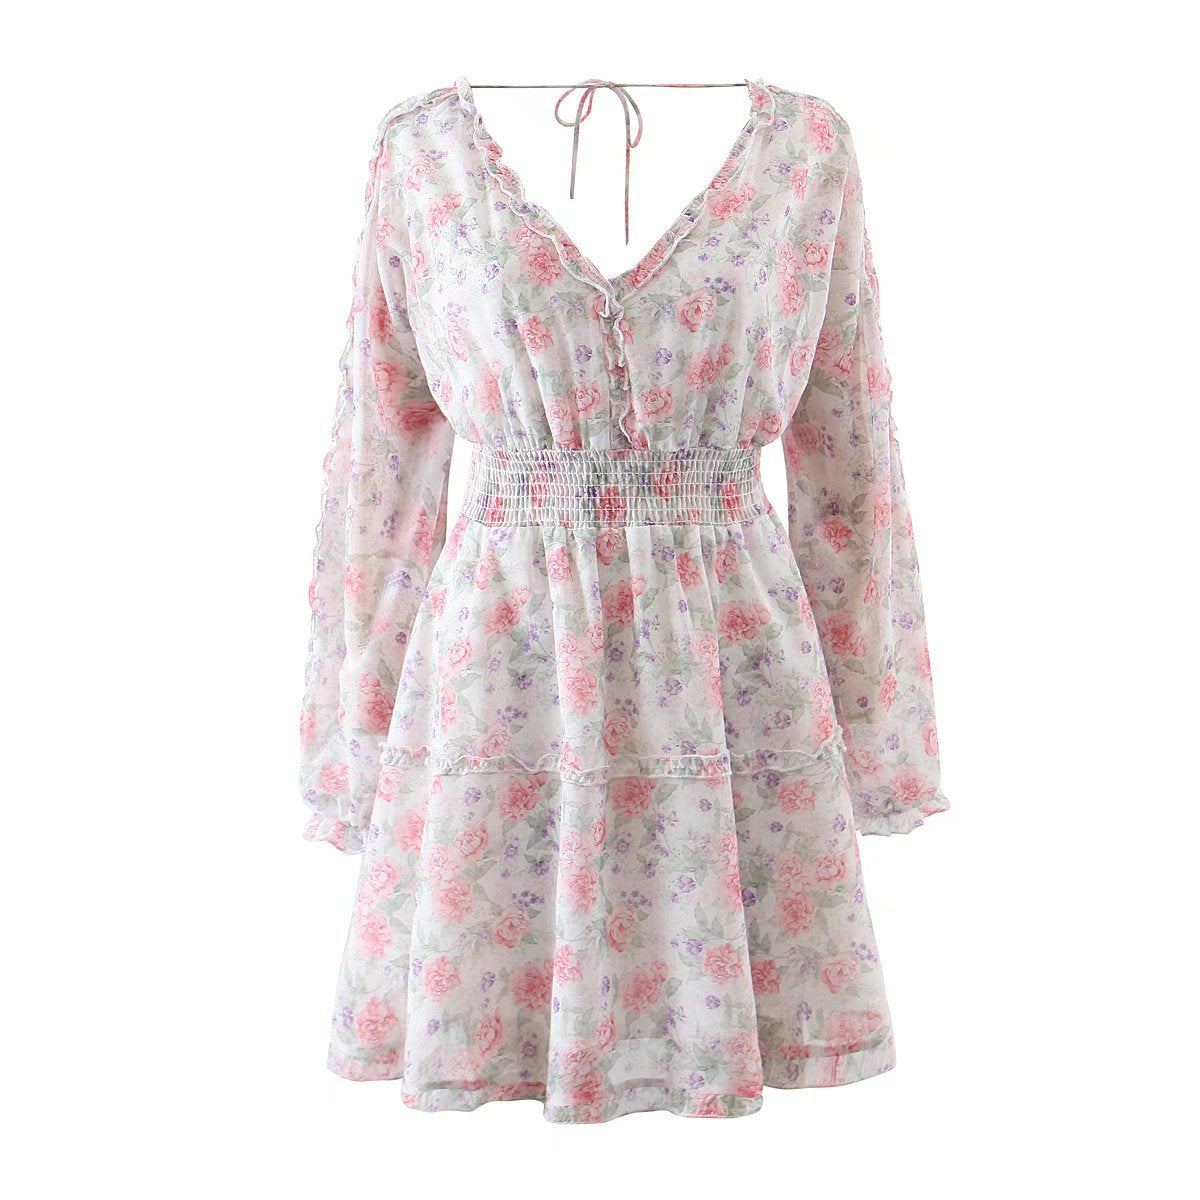 Dreamy Floral 1970s Style Pastel Short Ruffled Dress